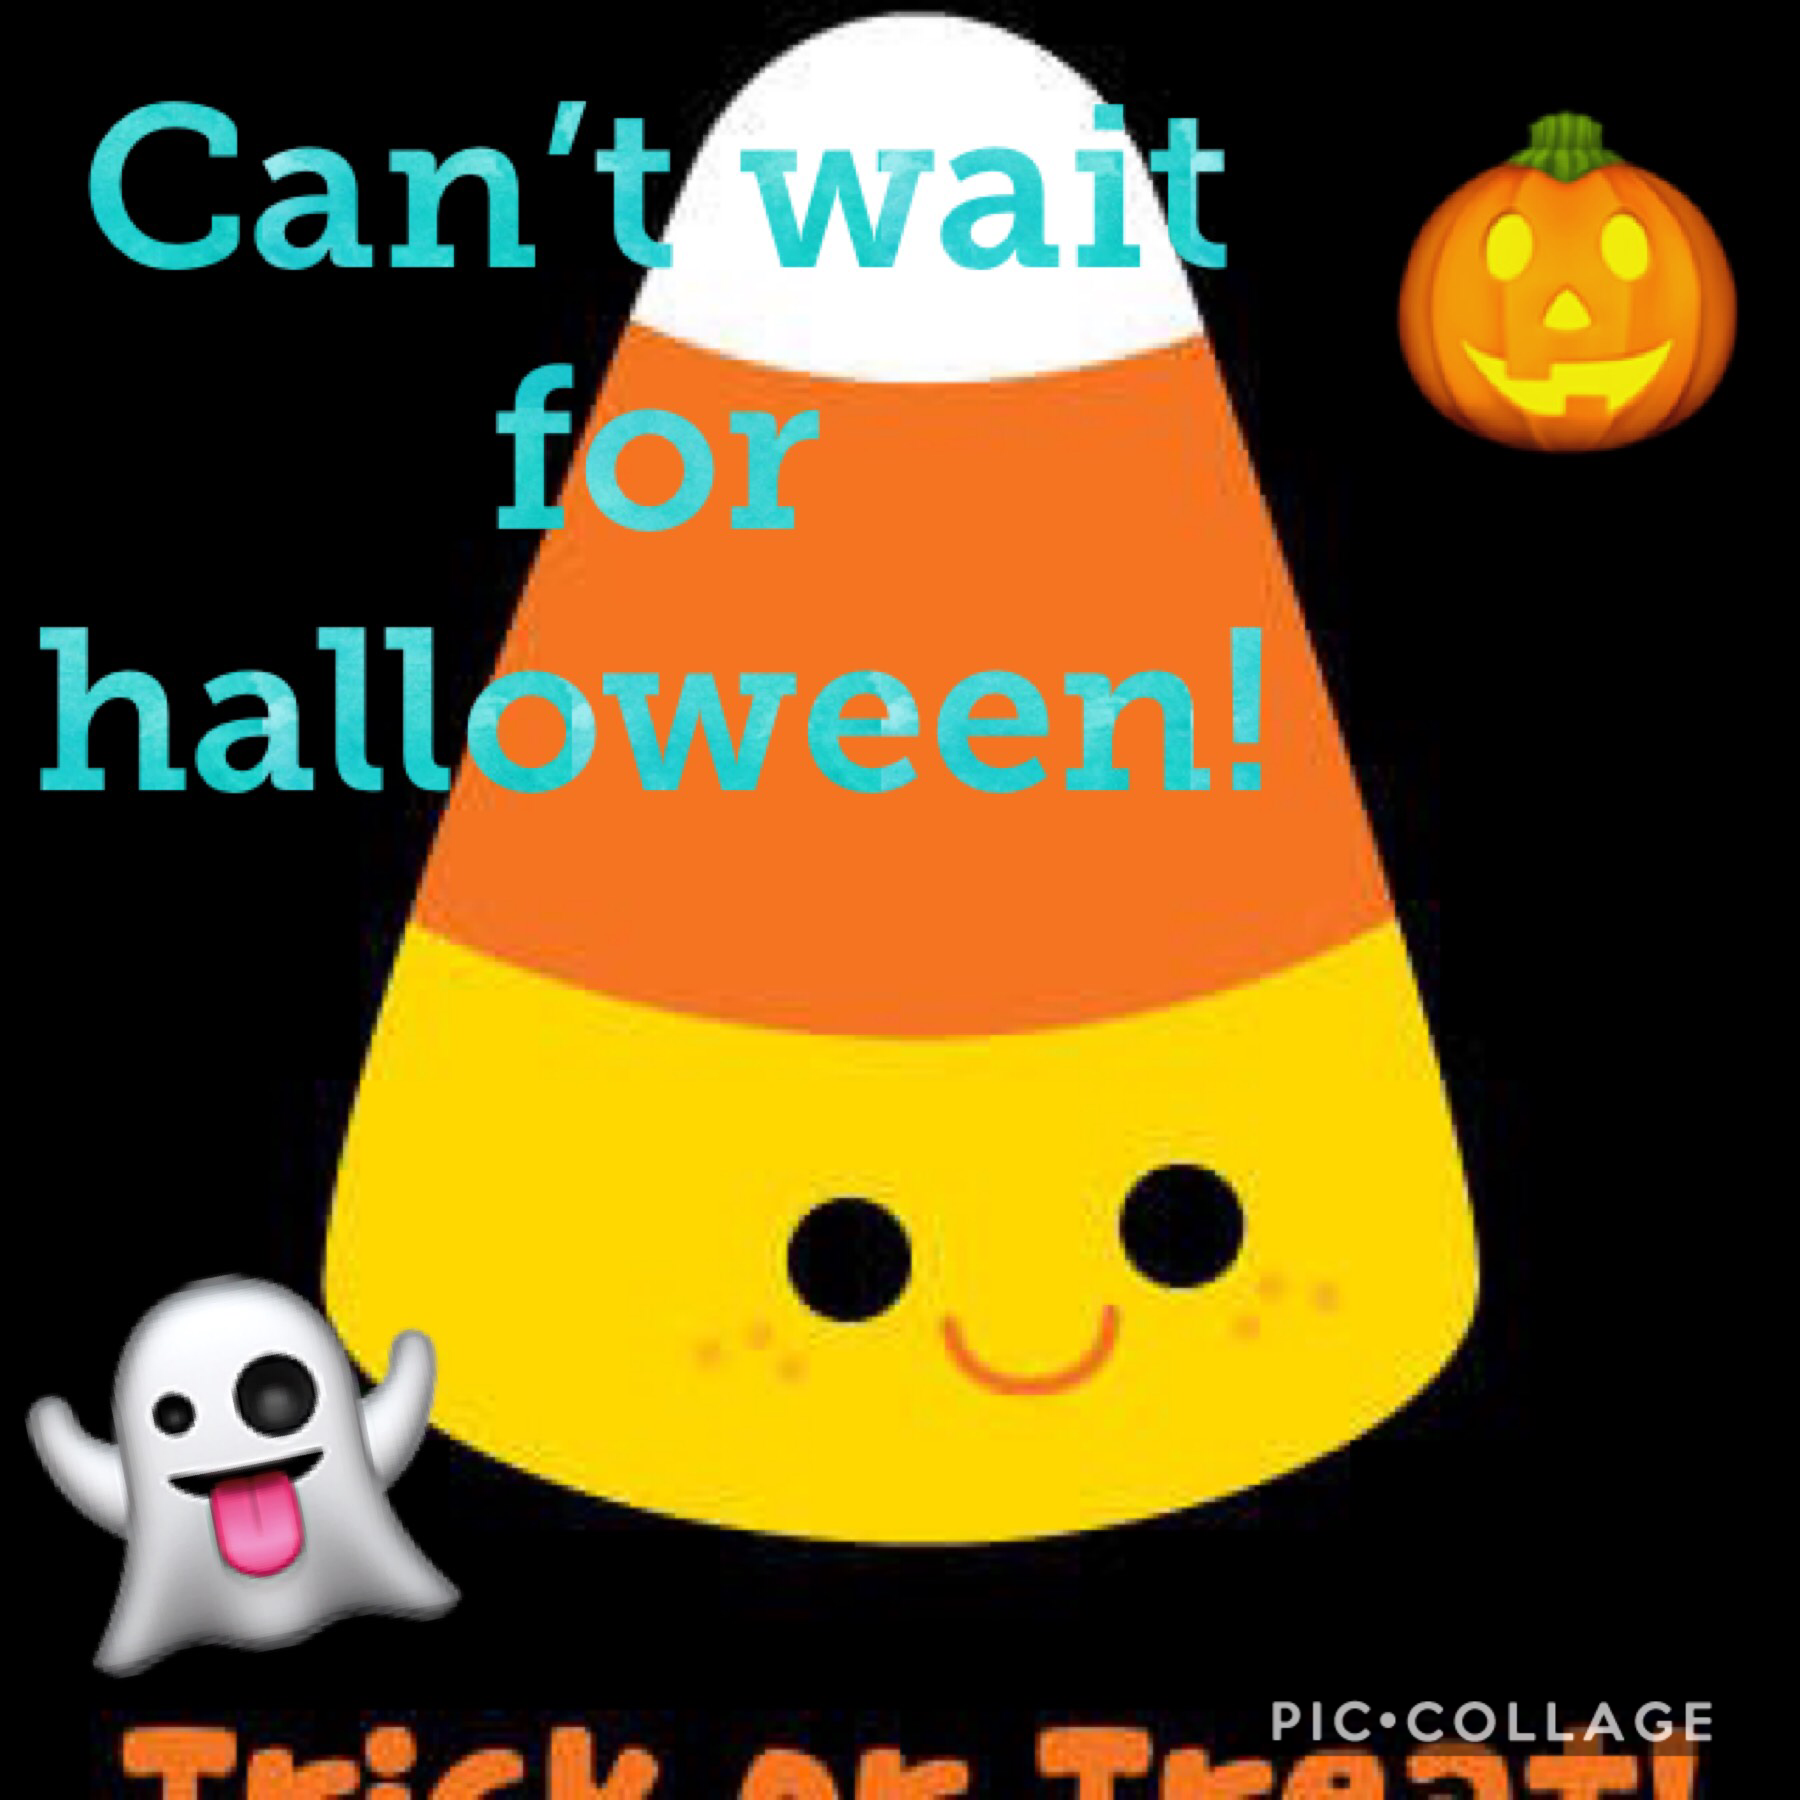 🎃Tap🎃
I can’t believe Halloween is only in 3 days!! 😃😃